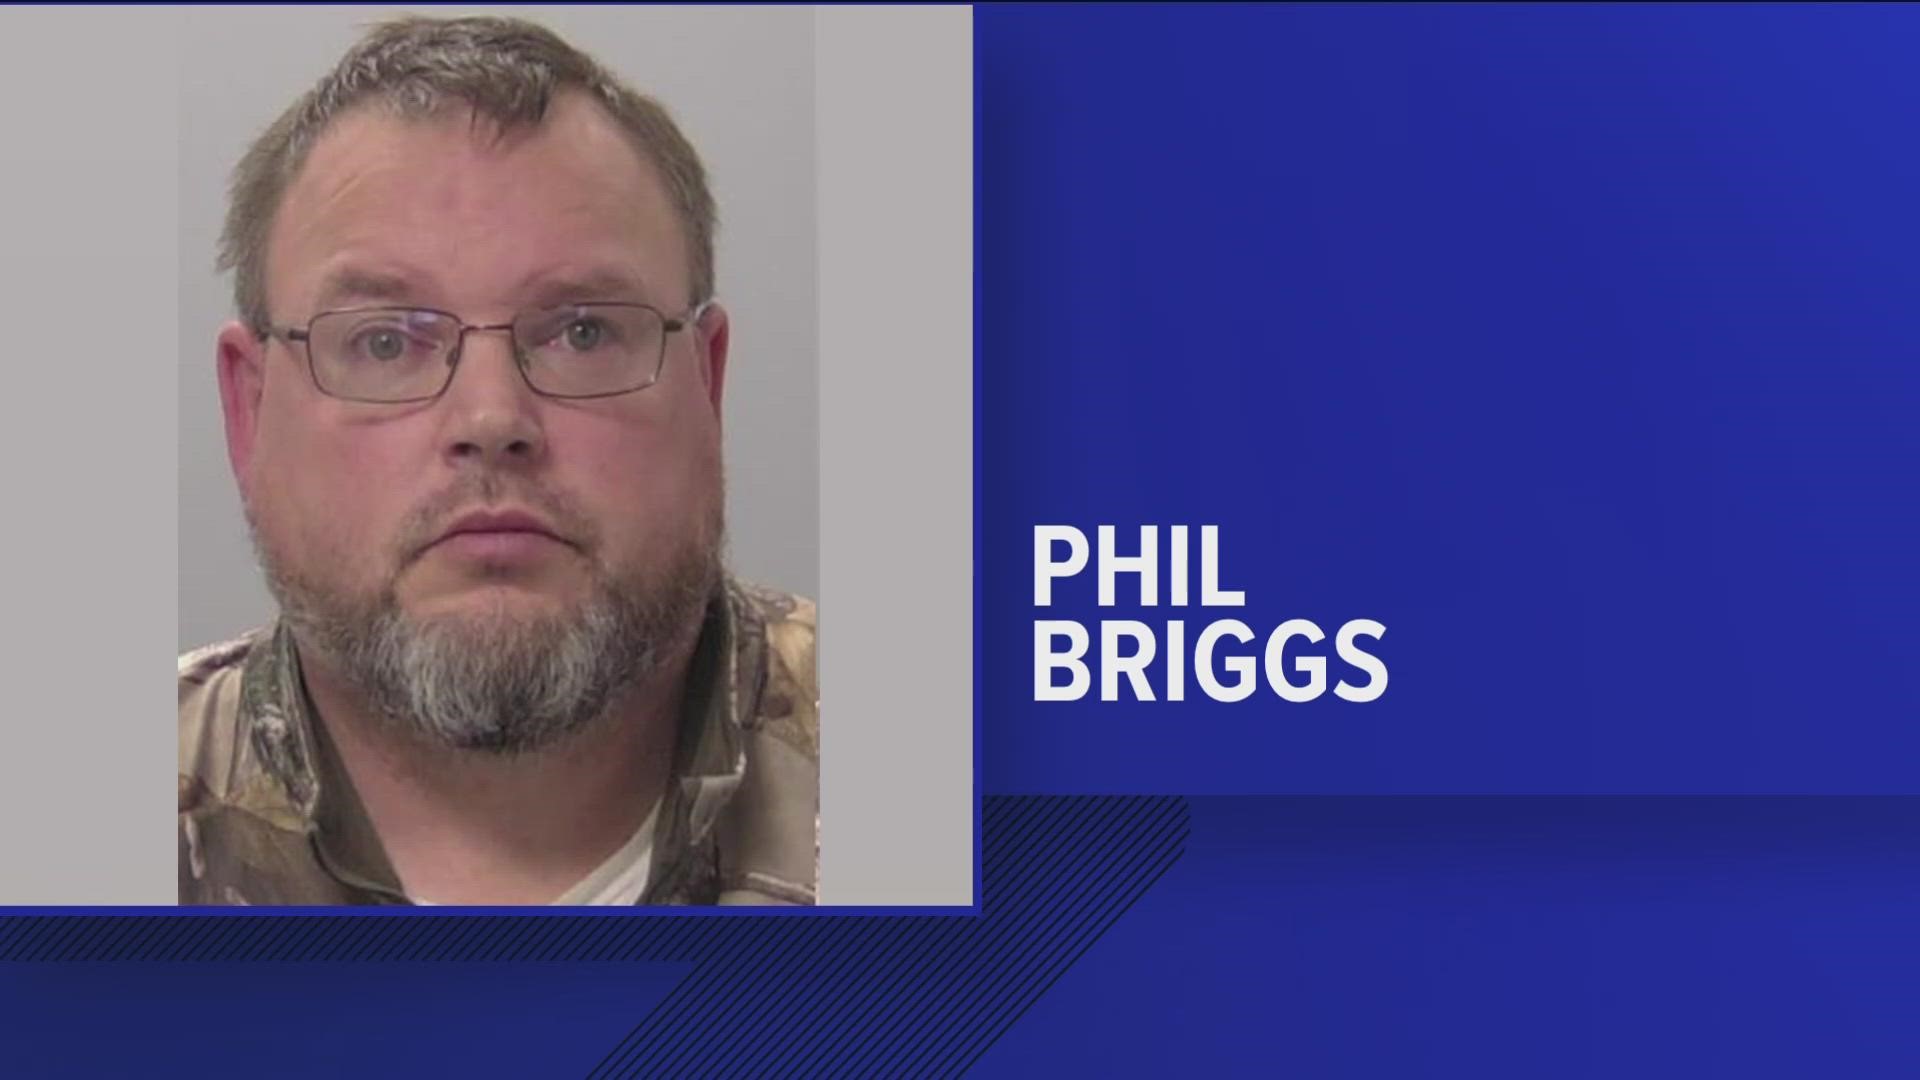 Phil Briggs, mayor of Spencerville, was arraigned in Lima Municipal Court on Wednesday on charges of pandering obscenity involving a minor.